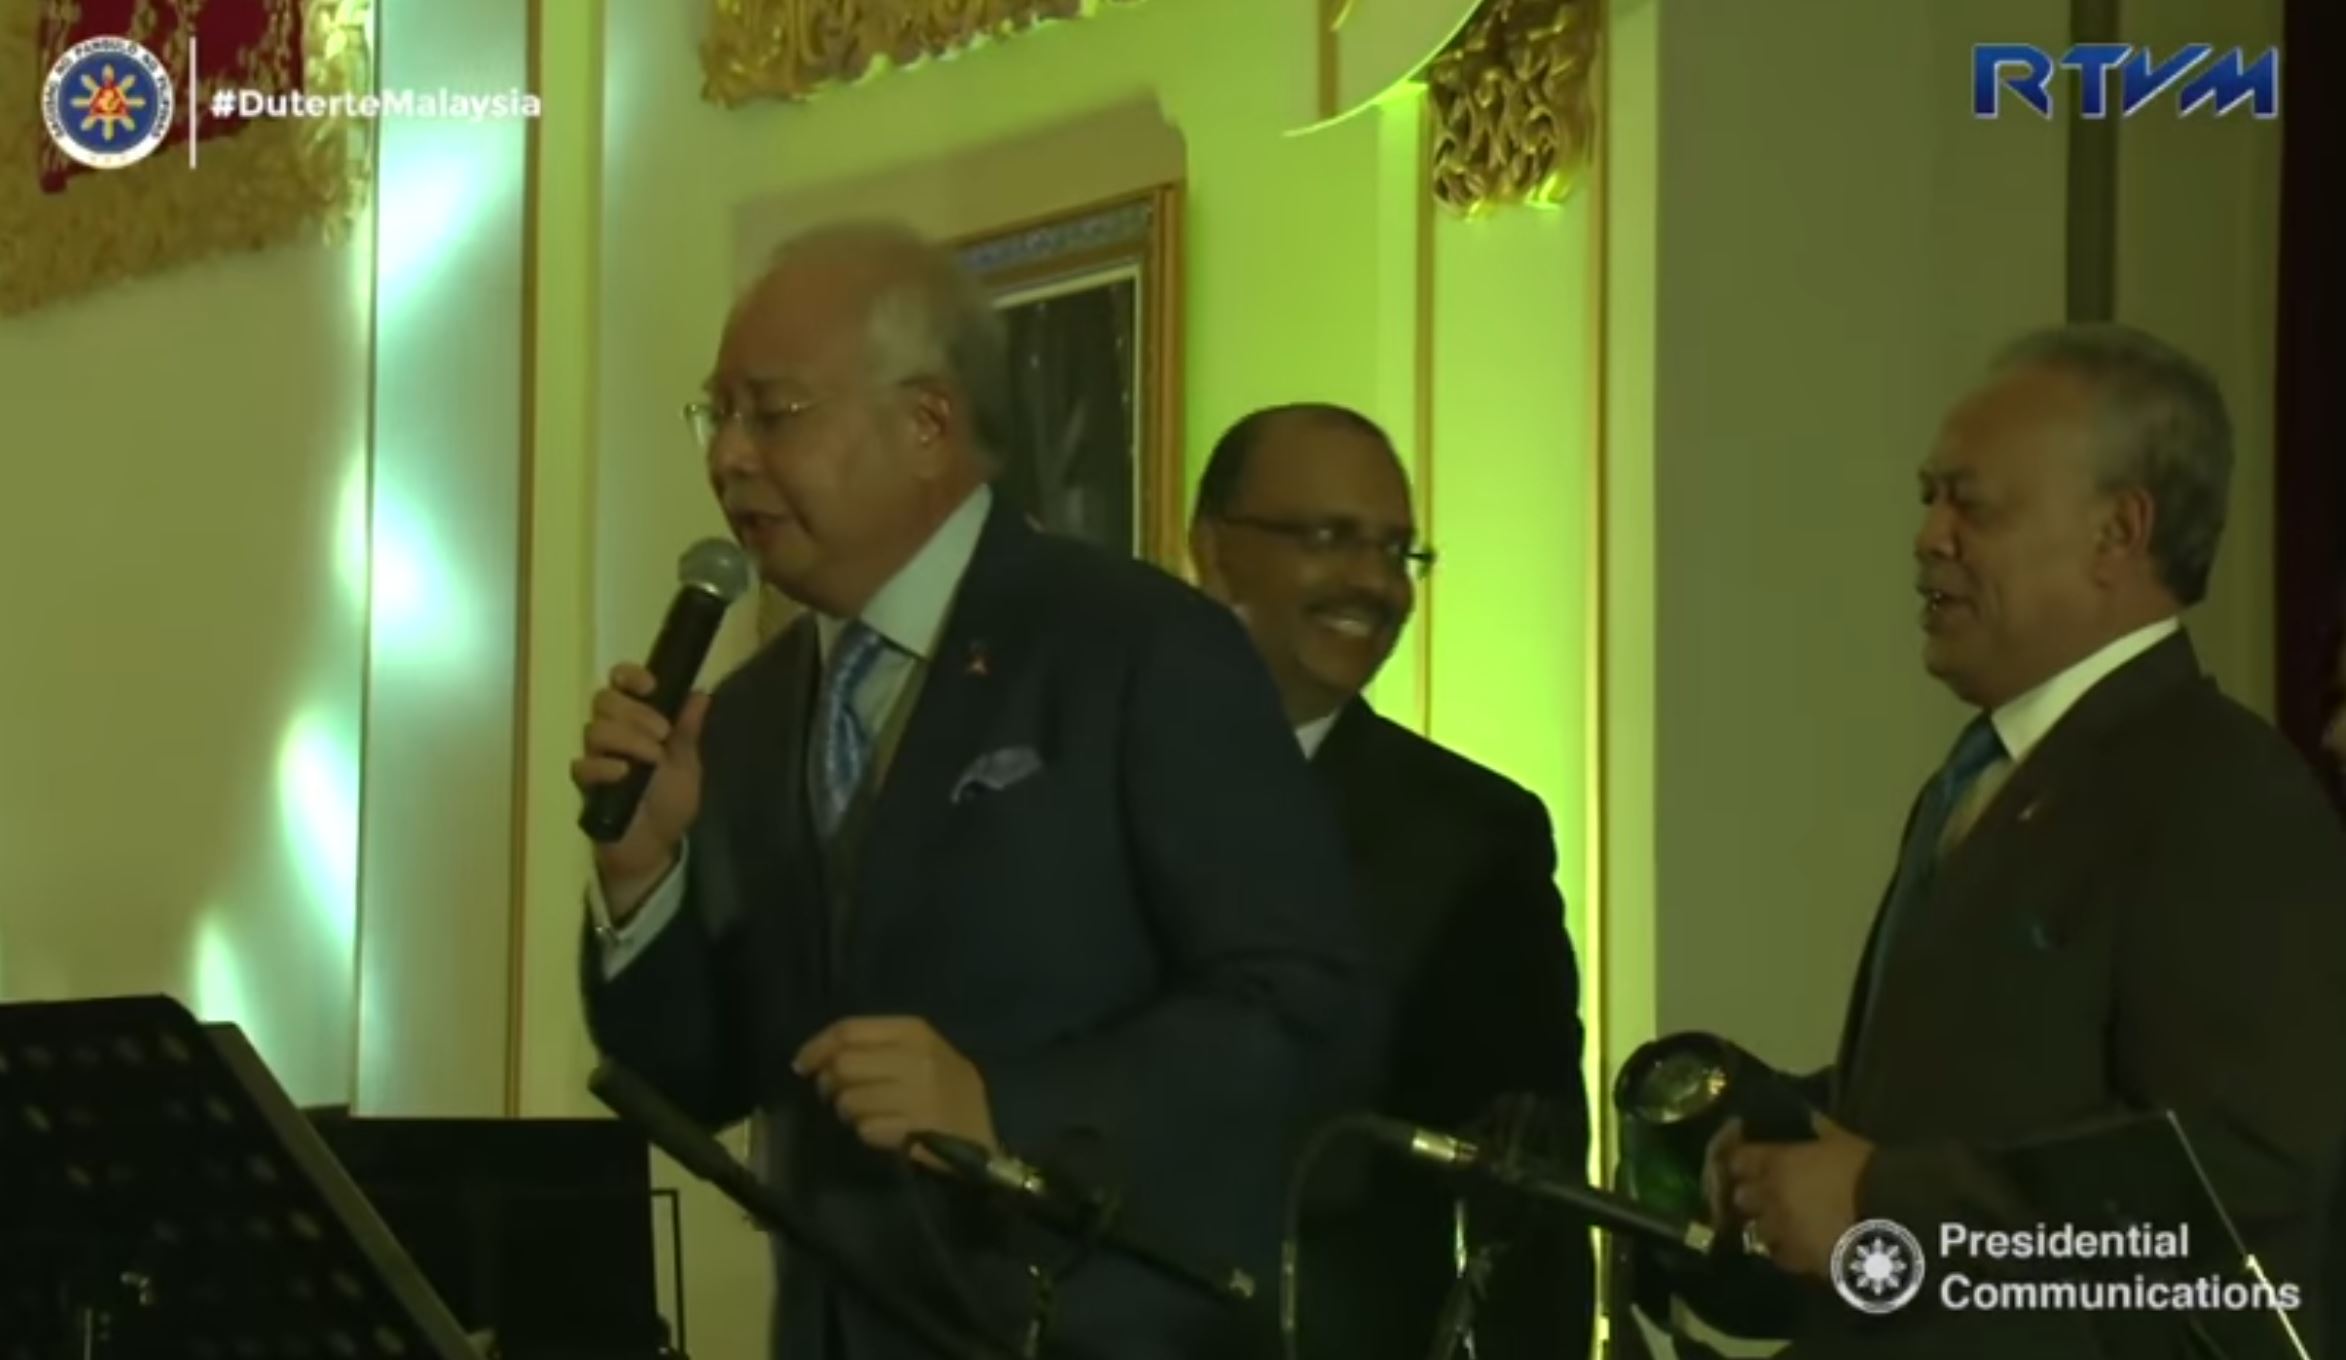 Malaysian Prime Minister Najib Razak singing "The Young Ones" by British pop singer Cliff Richard during the dinner he hosted for Philippine president Rodrigo Duterte at the end of the latter's two-day official visit. (Photo grabbed from RTVM video)